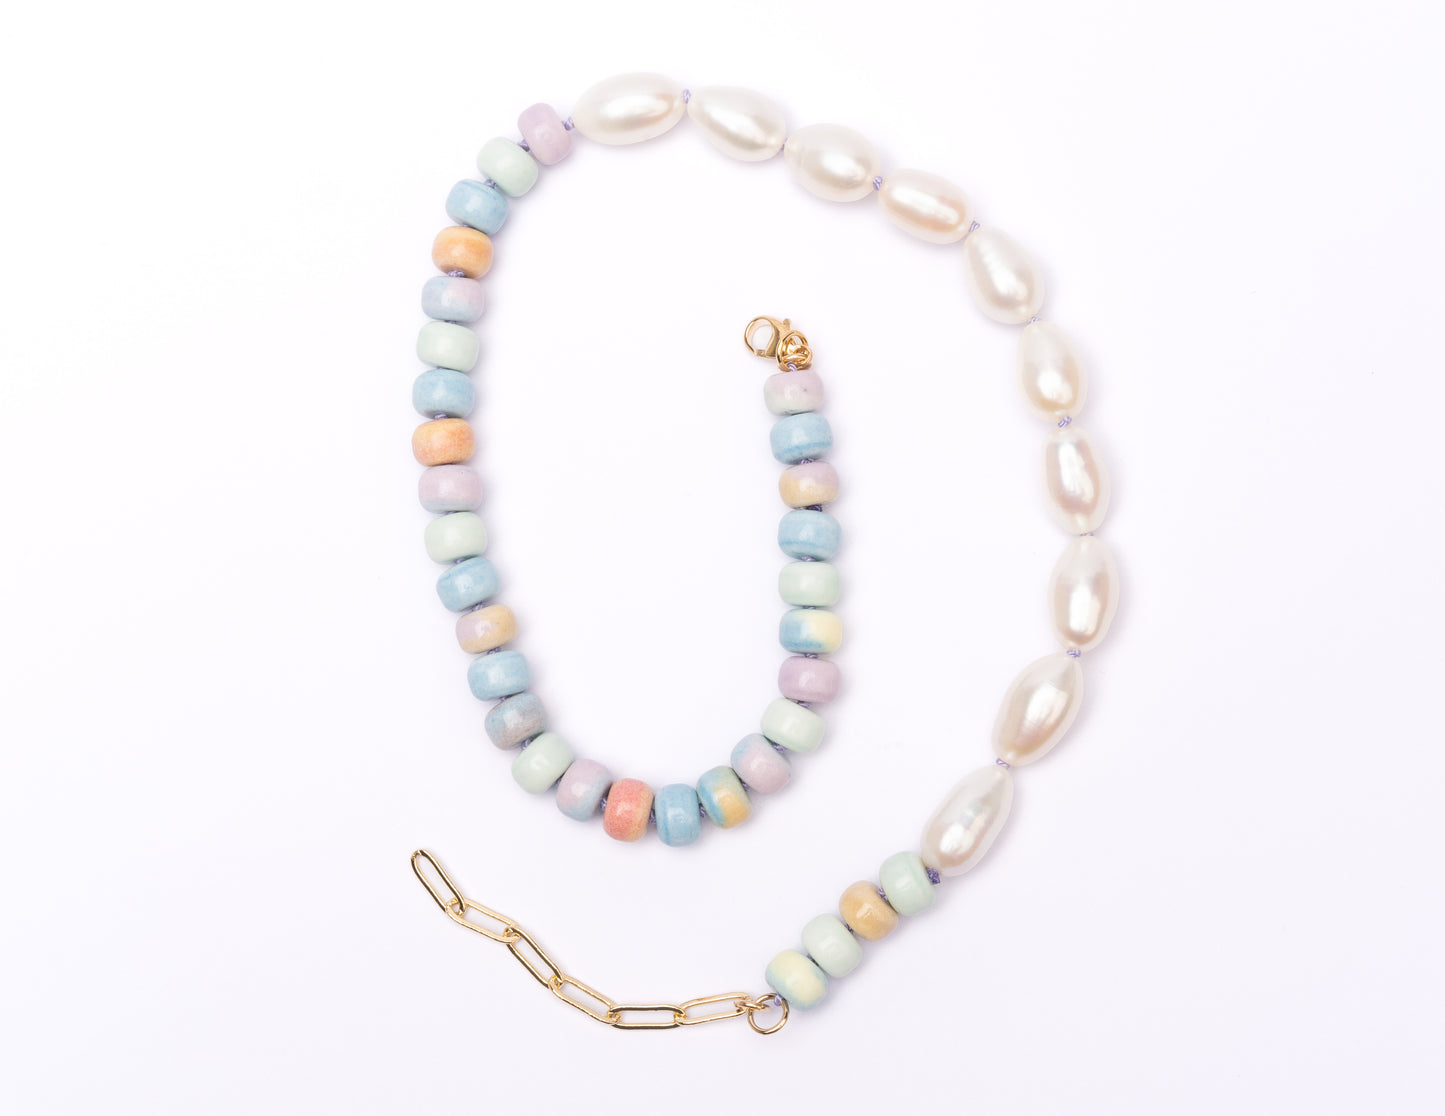 Retro Ombré Pastel Rainbow + Freshwater Pearl Tie Dyed Gemstone Moi et Toi Candy Necklace